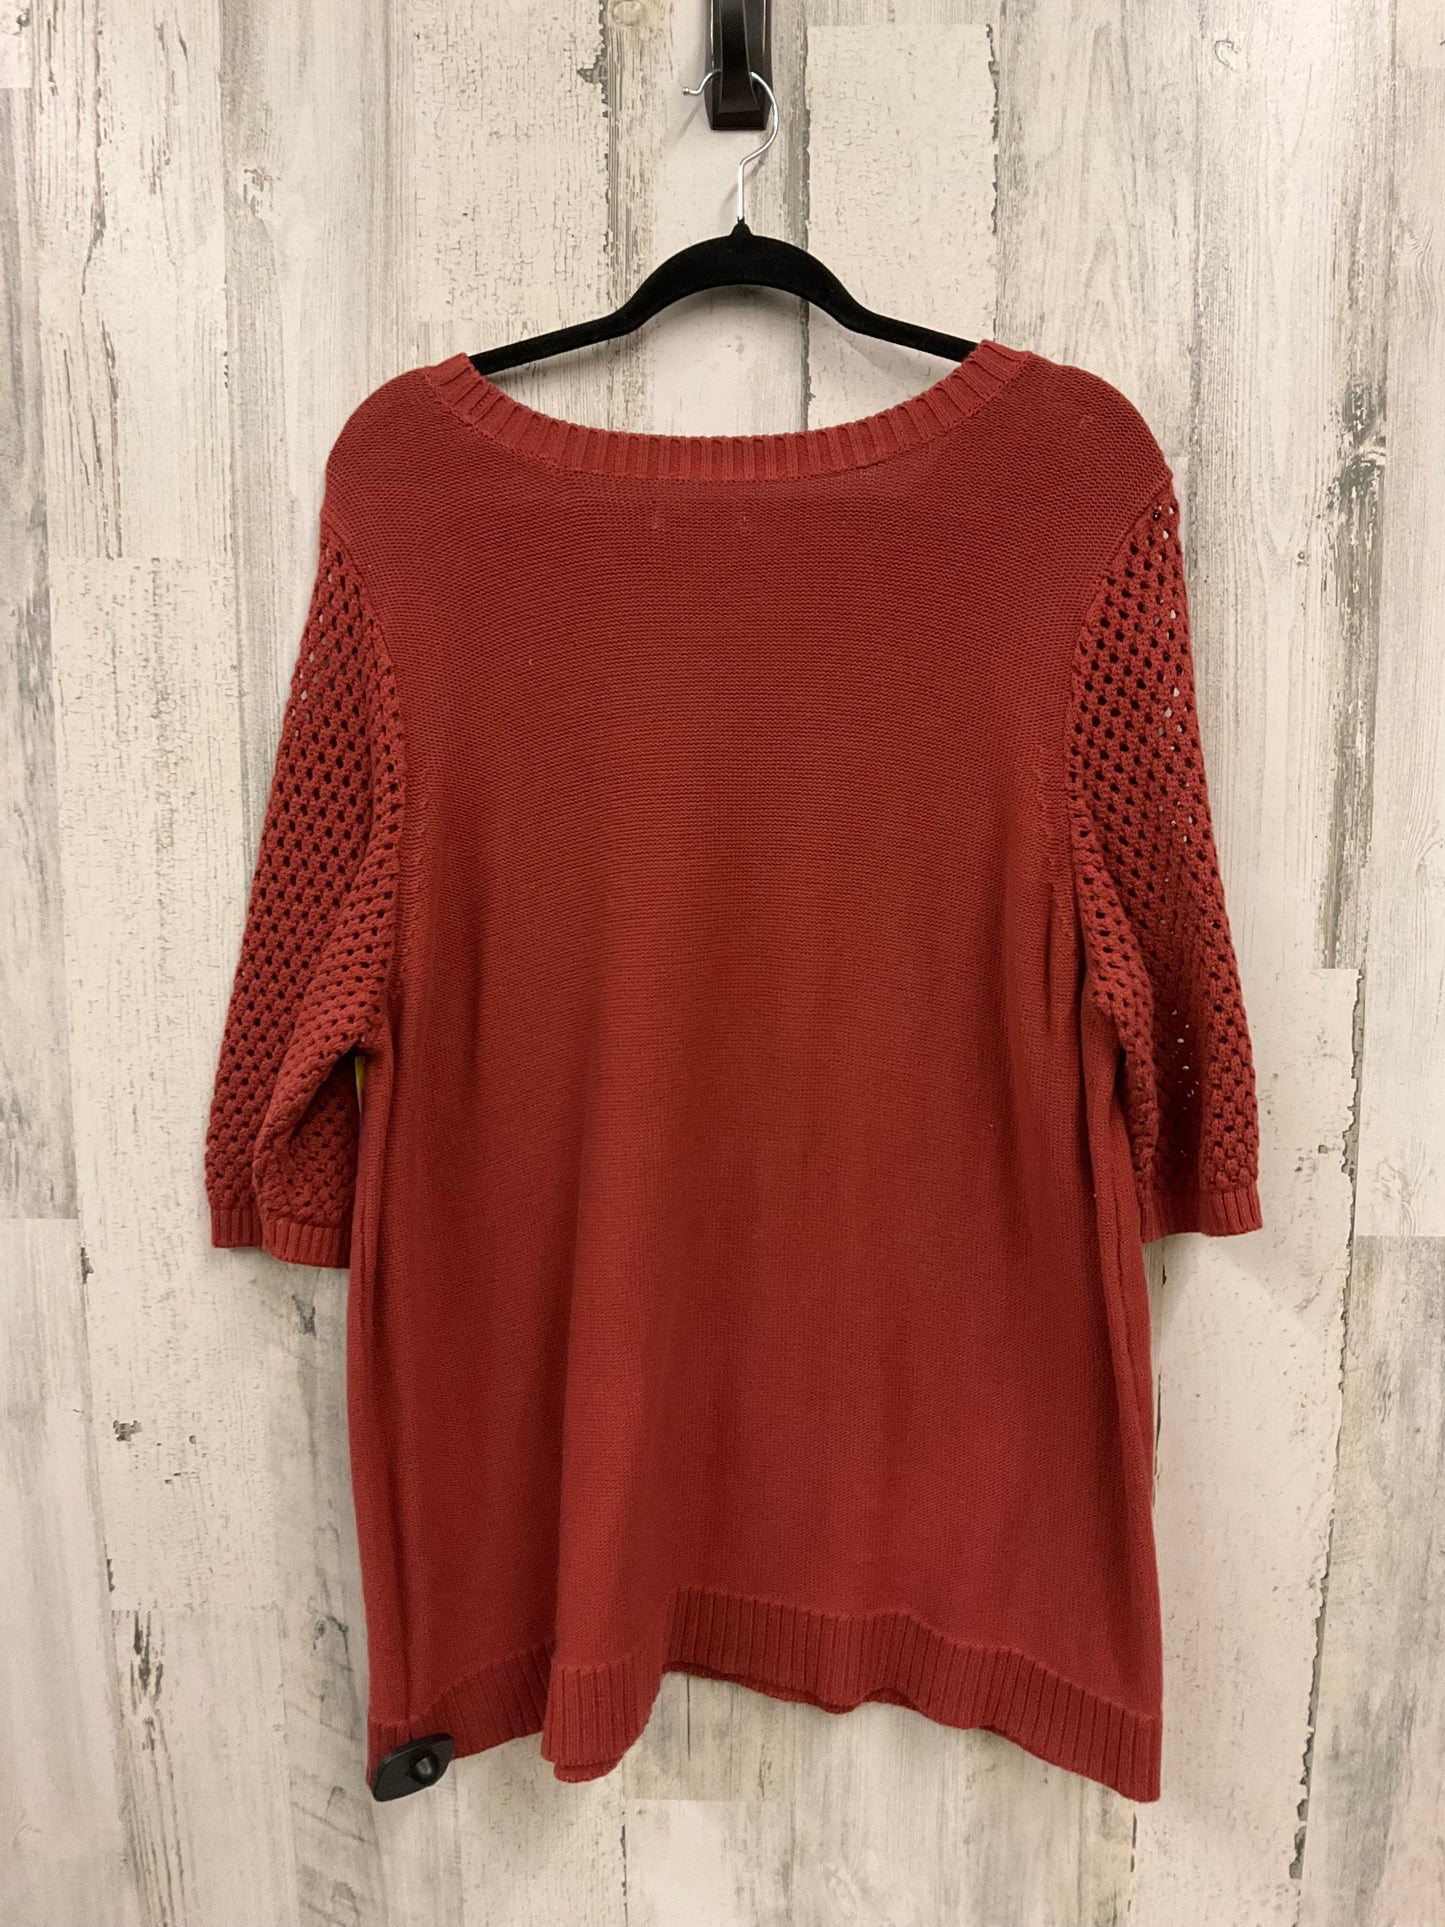 Sweater Short Sleeve By Sonoma  Size: 2x